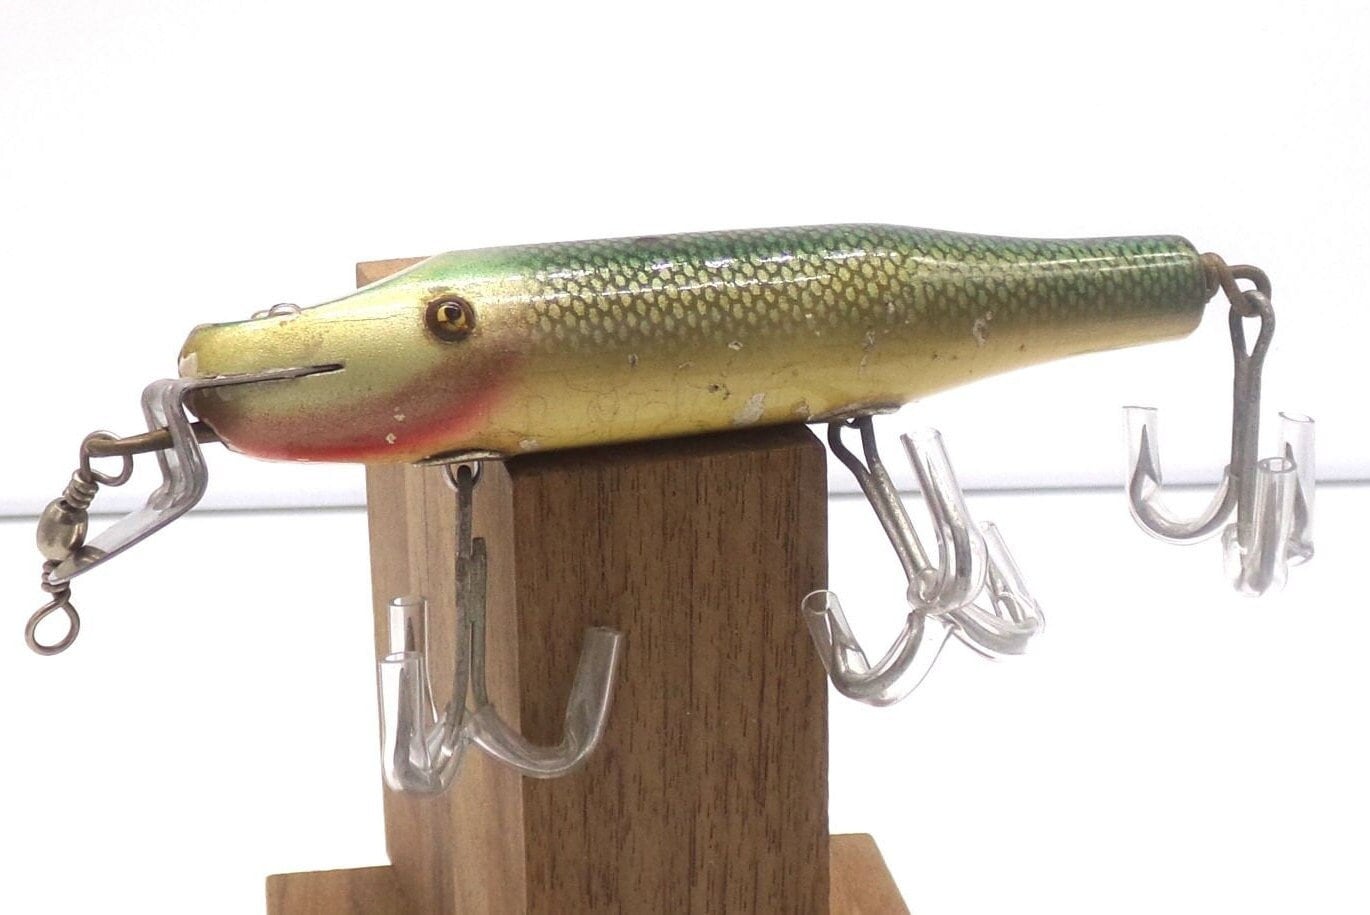 Creek Chub Bait Co. Red and White Jointed Lure With Glass Eyes and Two  Treble Hooks. Collectible Tackle Box Item, Possibly 1970s. -  Canada